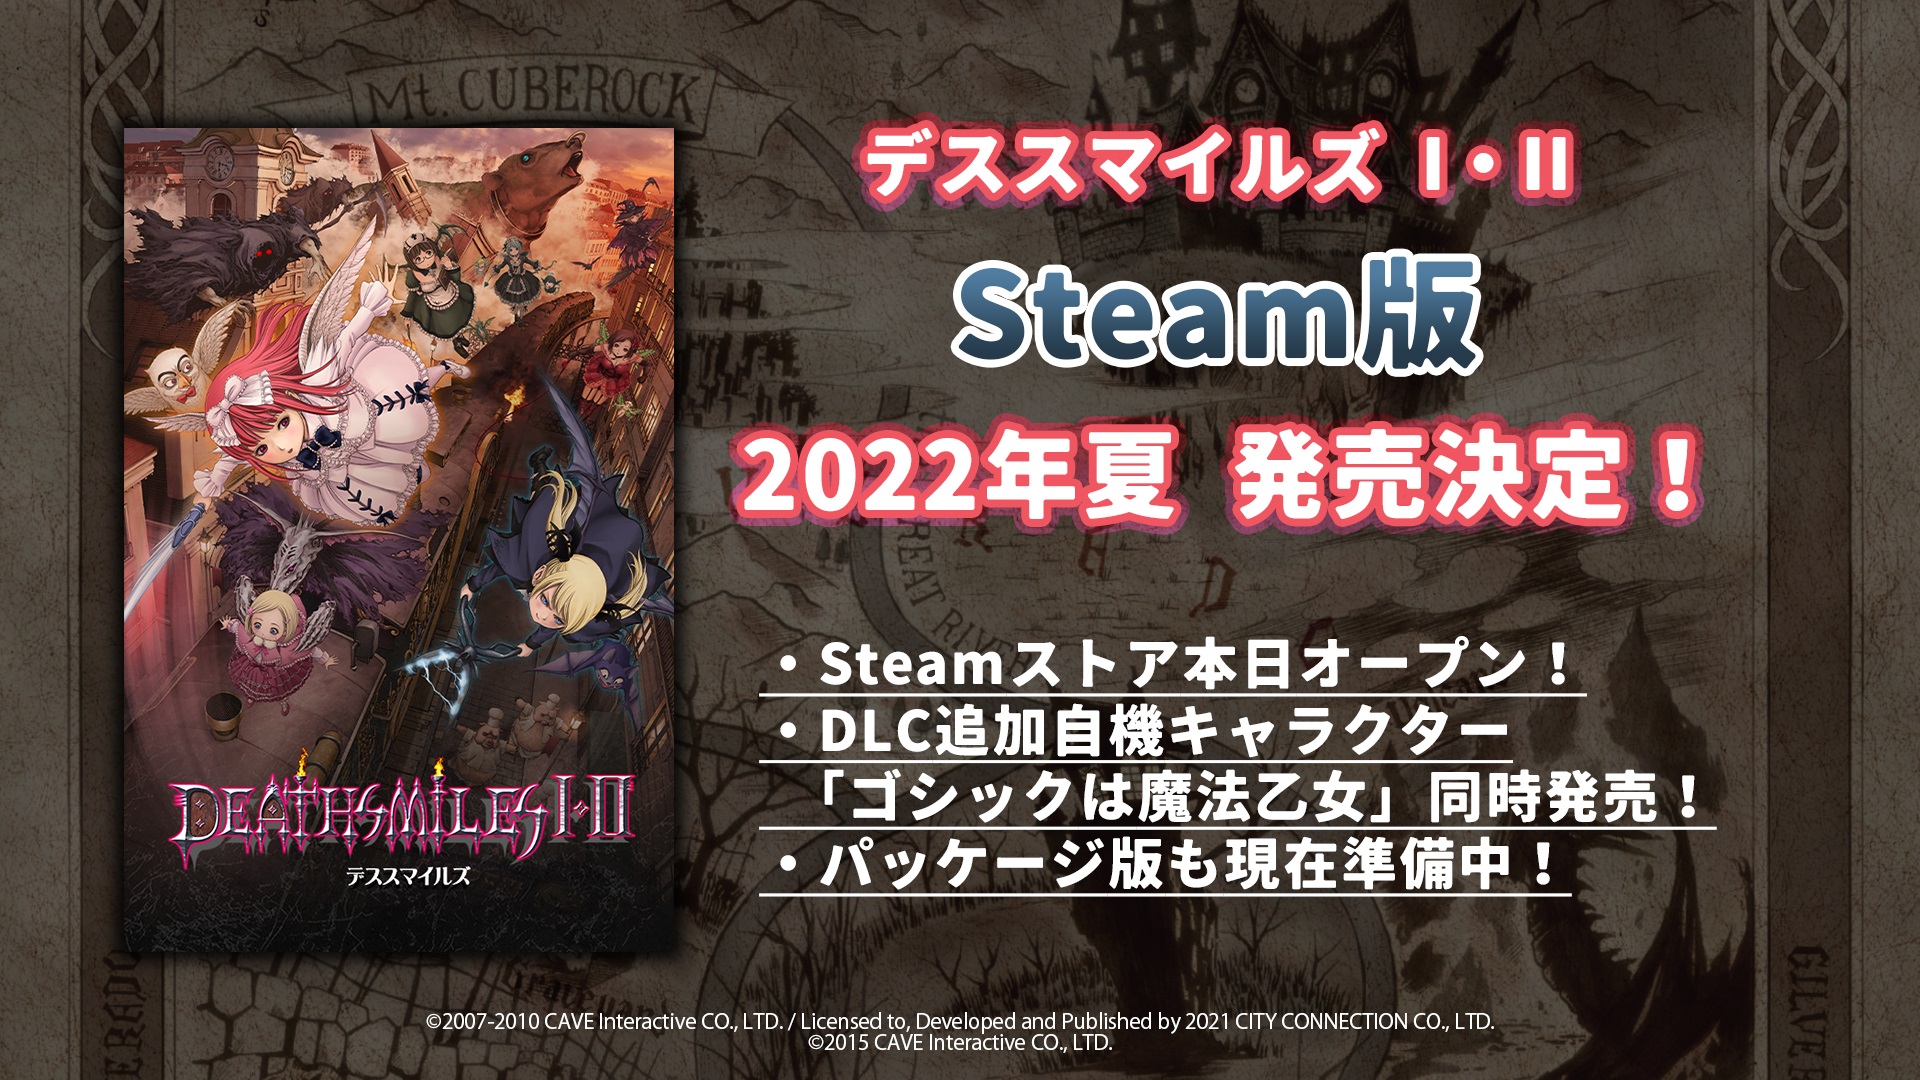 Deathsmiles I & II is coming to PC